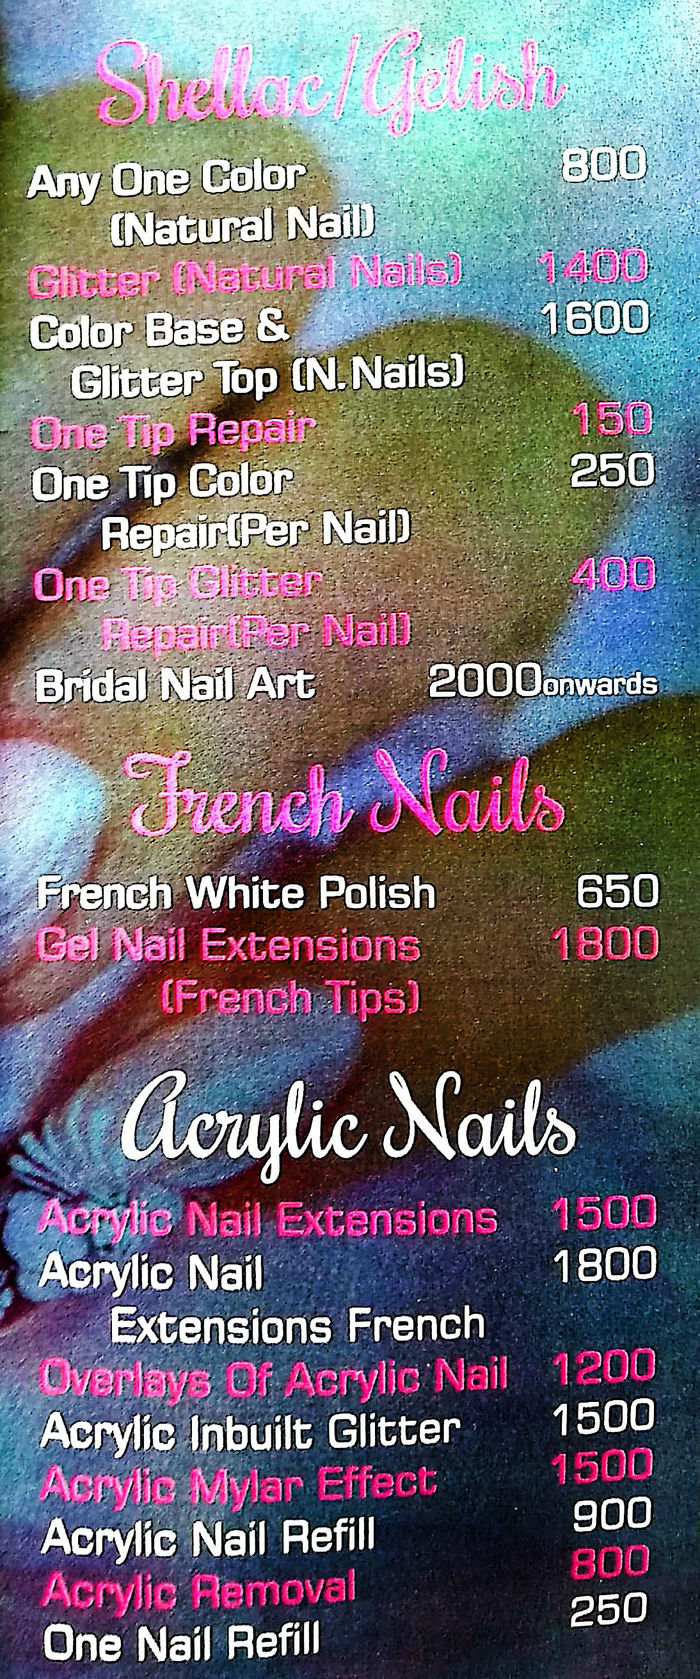 Top Nail Art Training Institutes in Mohali Sas Nagar - Best Nail Art Course  - Justdial